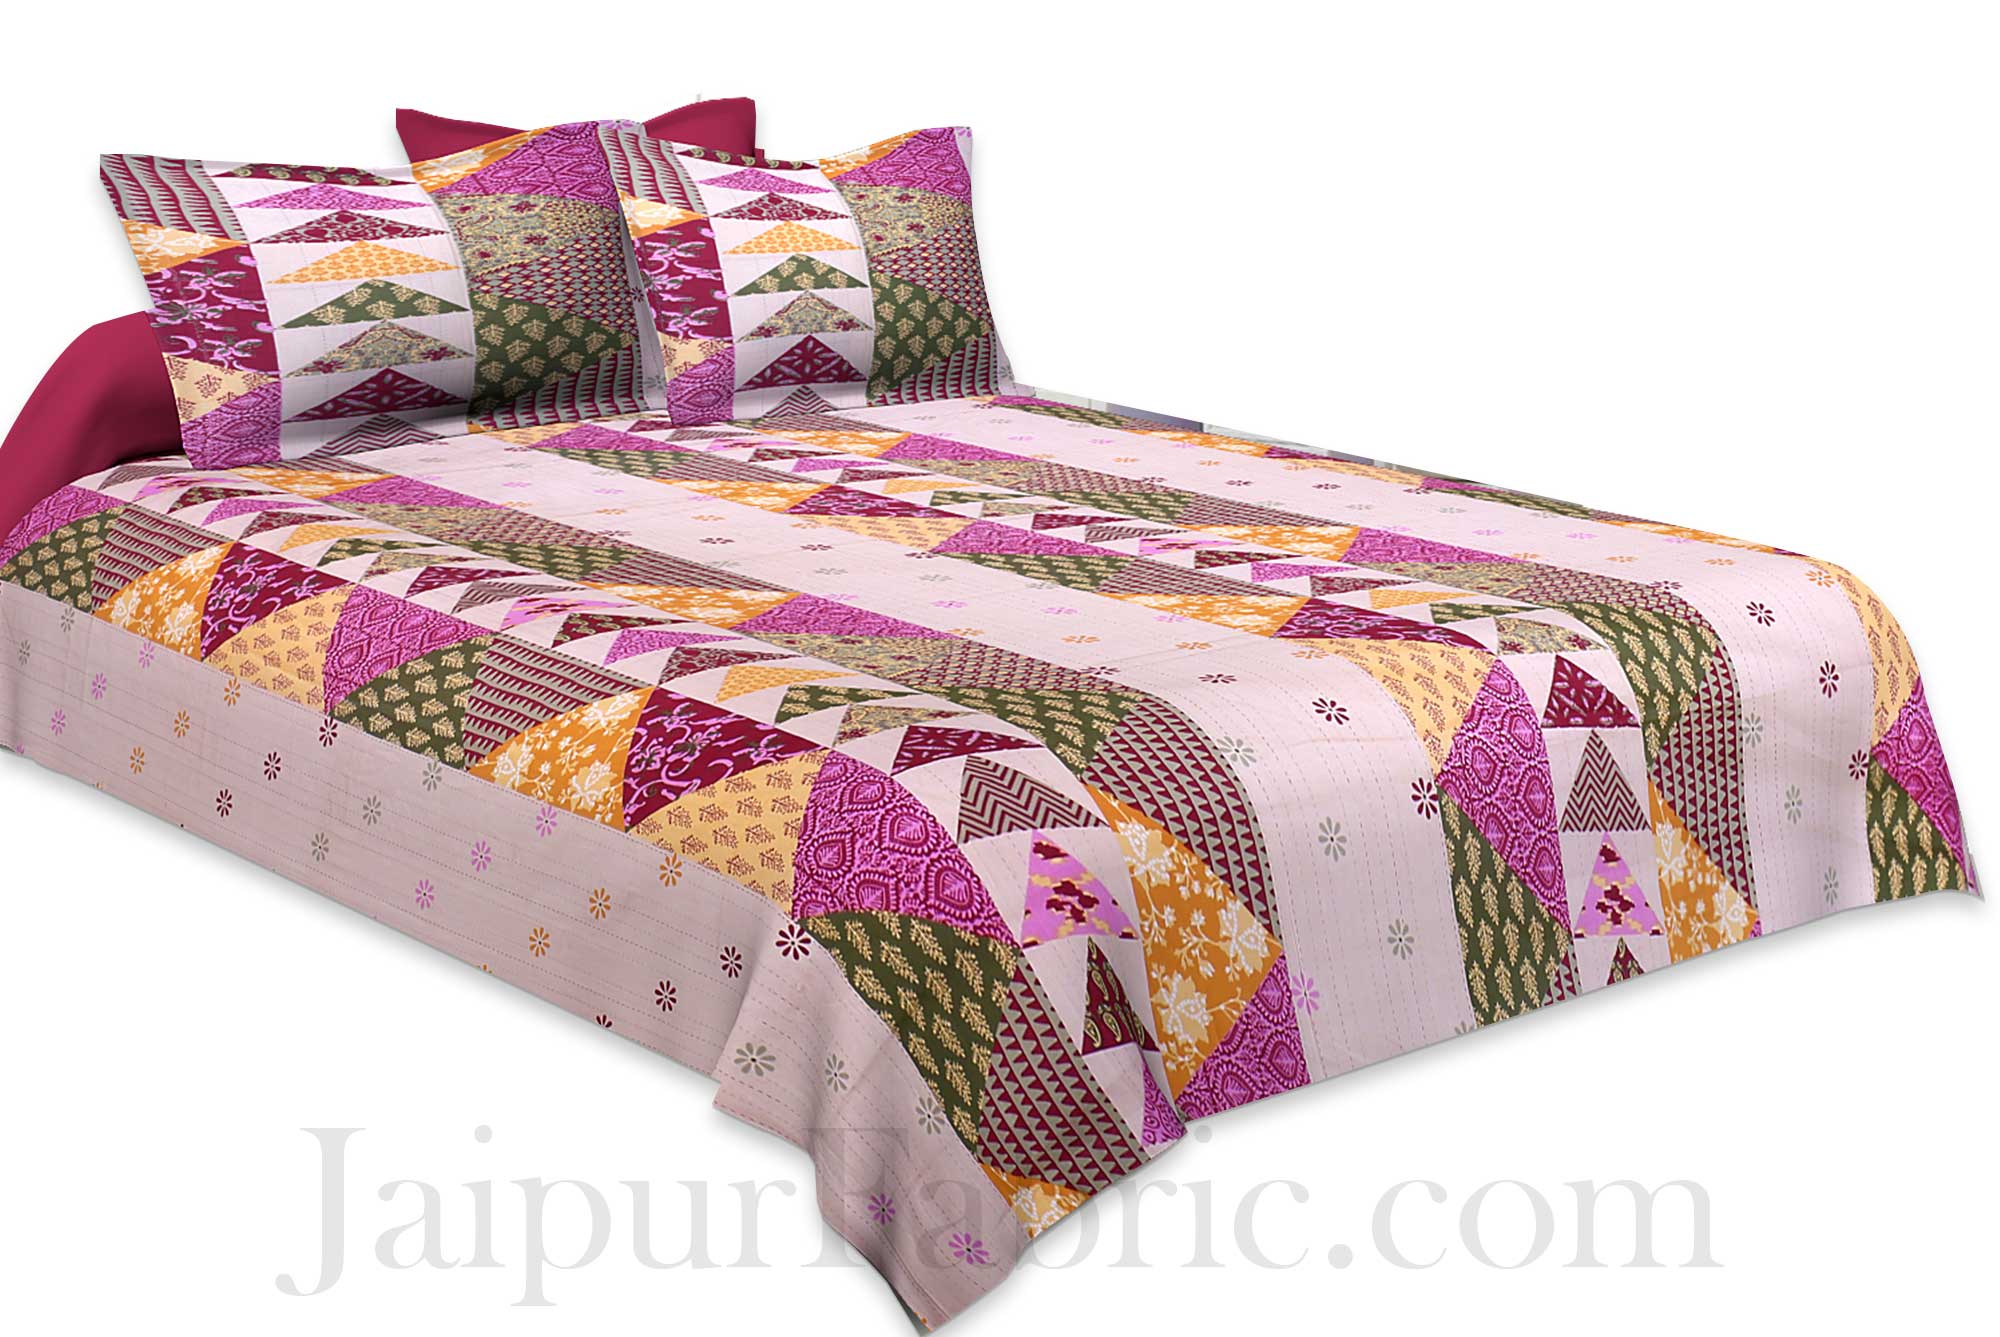 olive Twill Cotton  Double Bedsheet With Colorful Patchwork Design